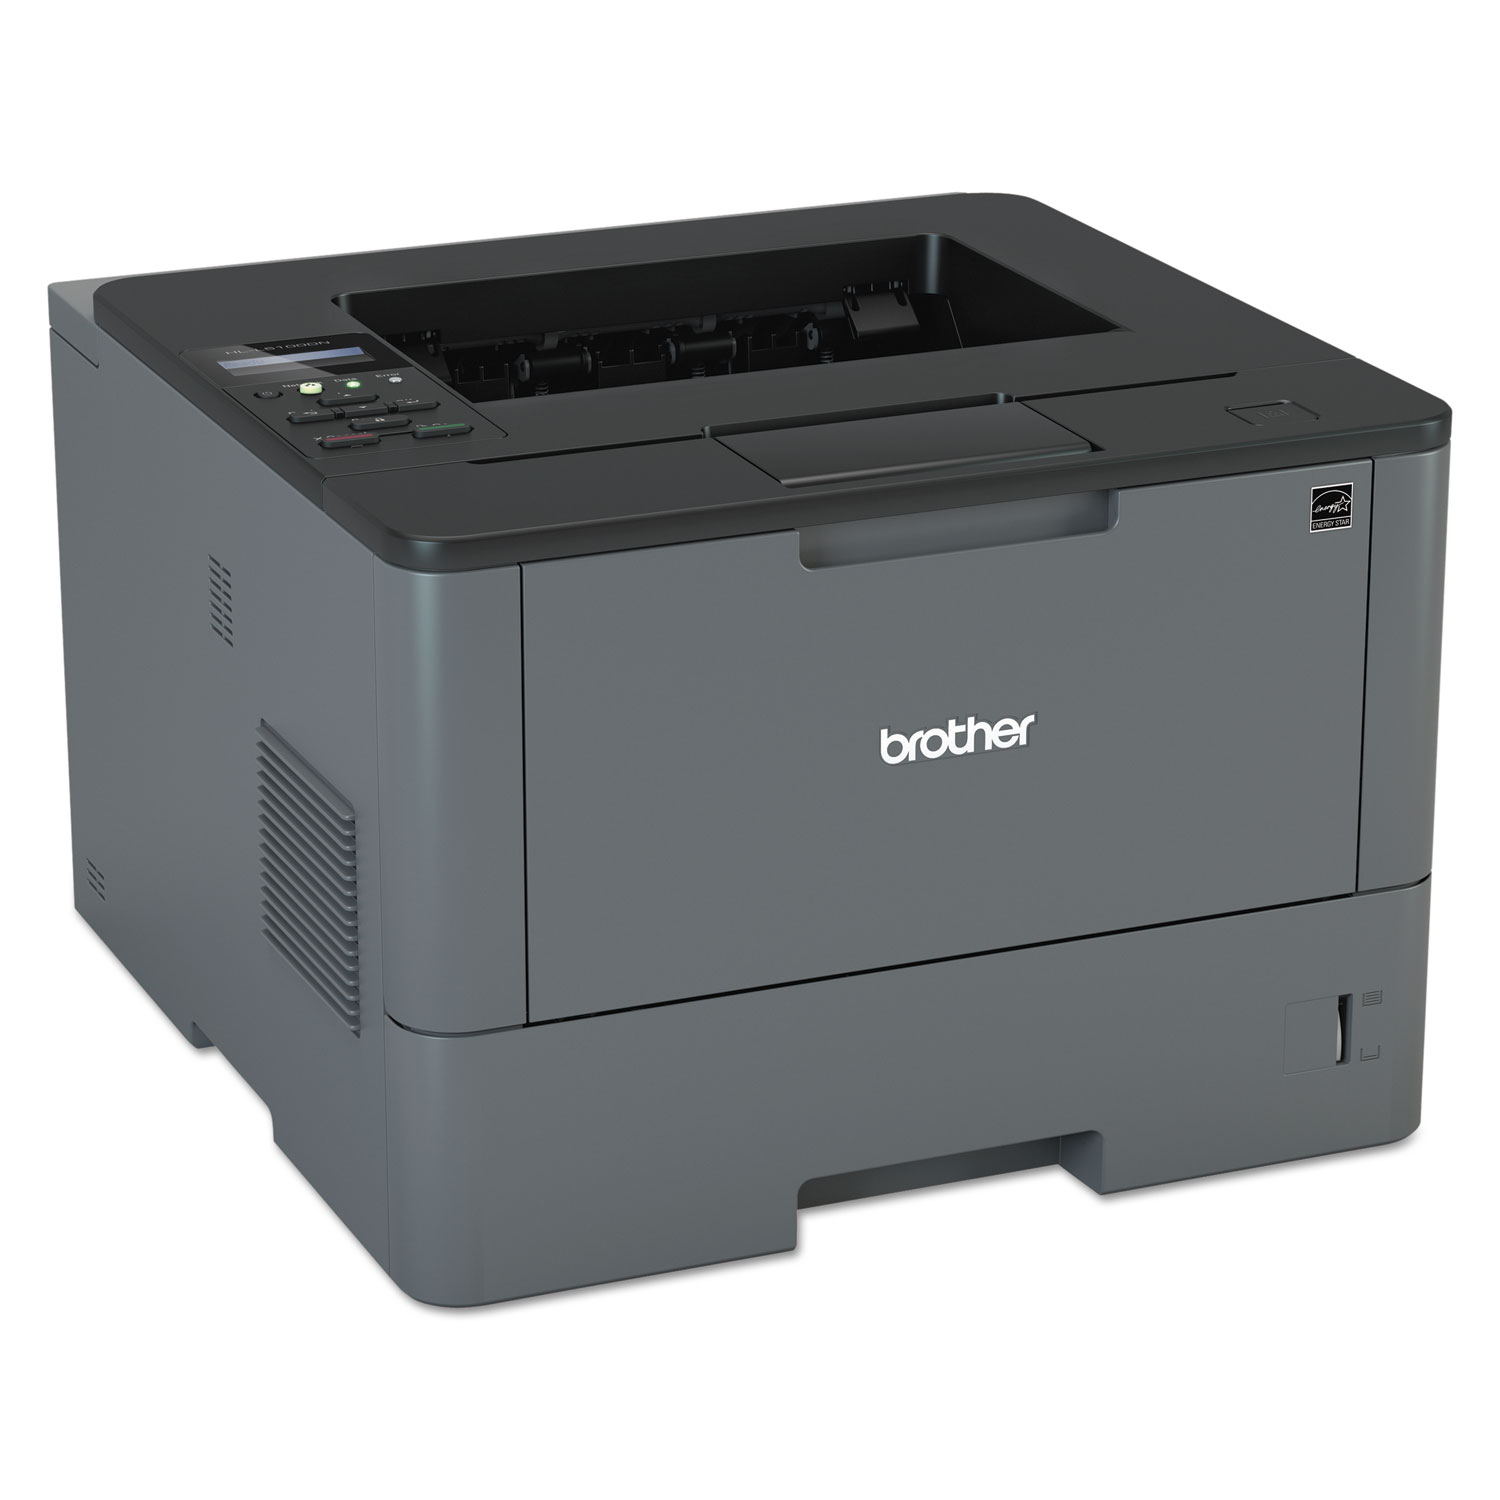 HL-L5100DN Business Laser Printer with Networking and Duplex Printing